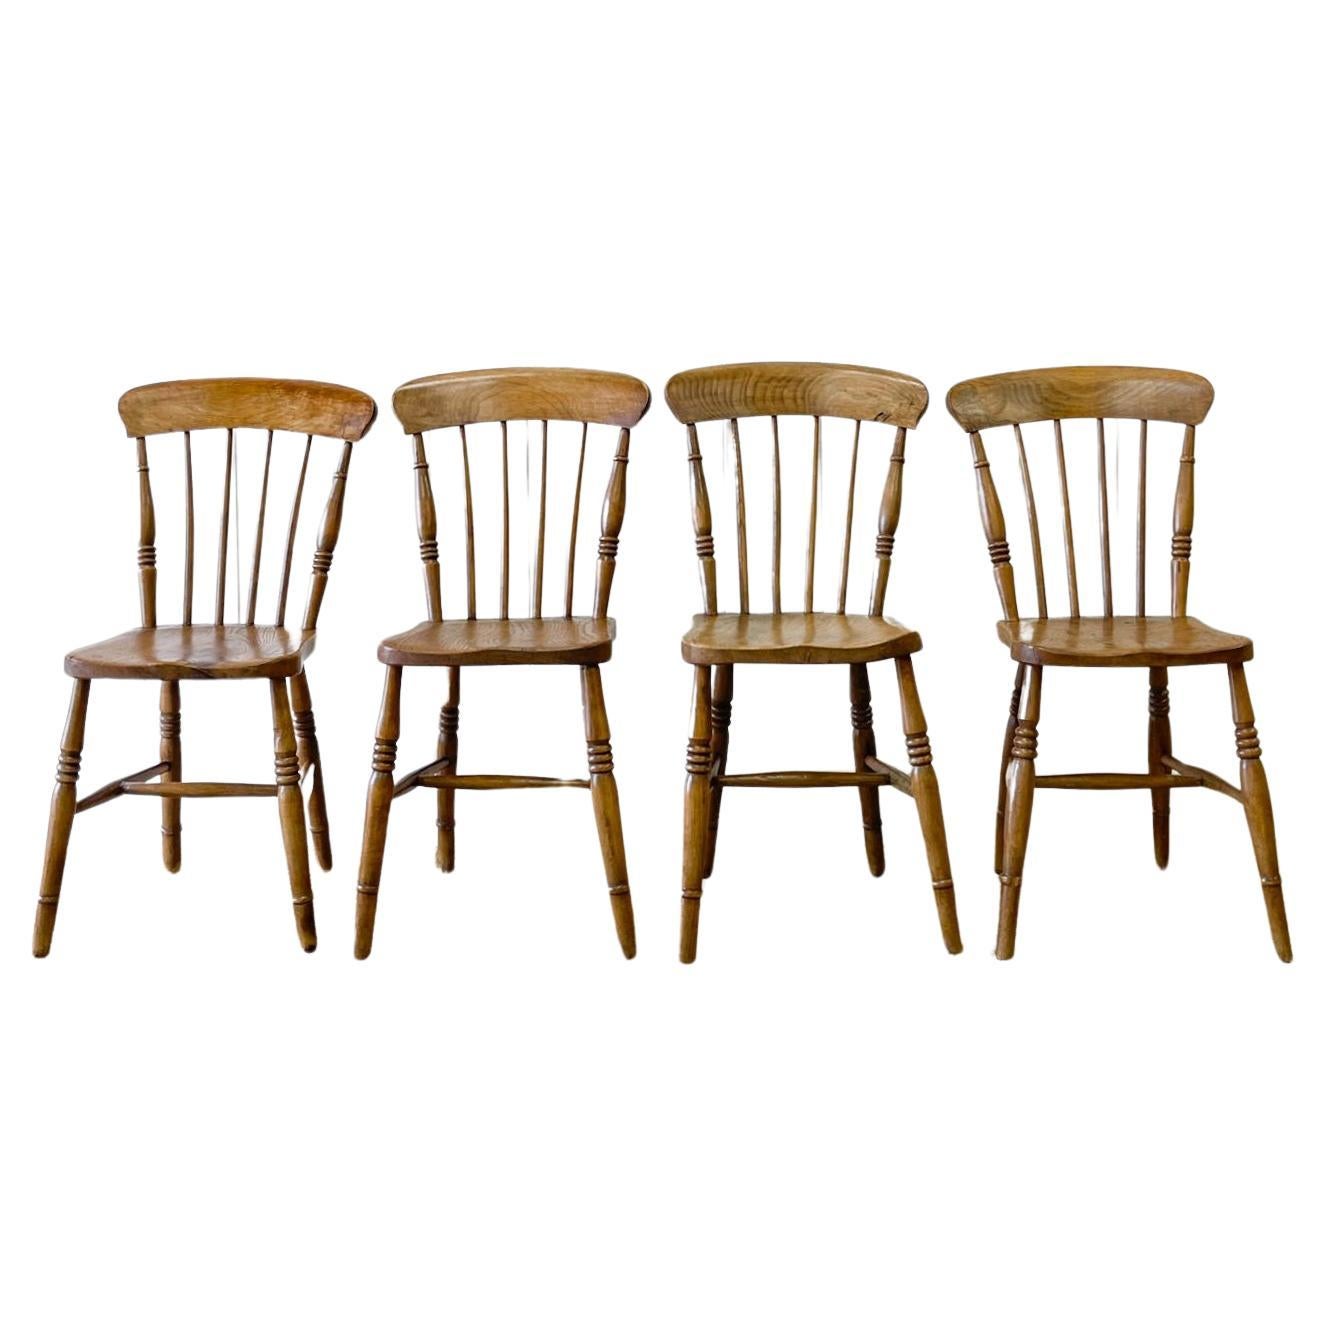 An Antique Set of 4 Early 19th Century Stick Back Chairs For Sale